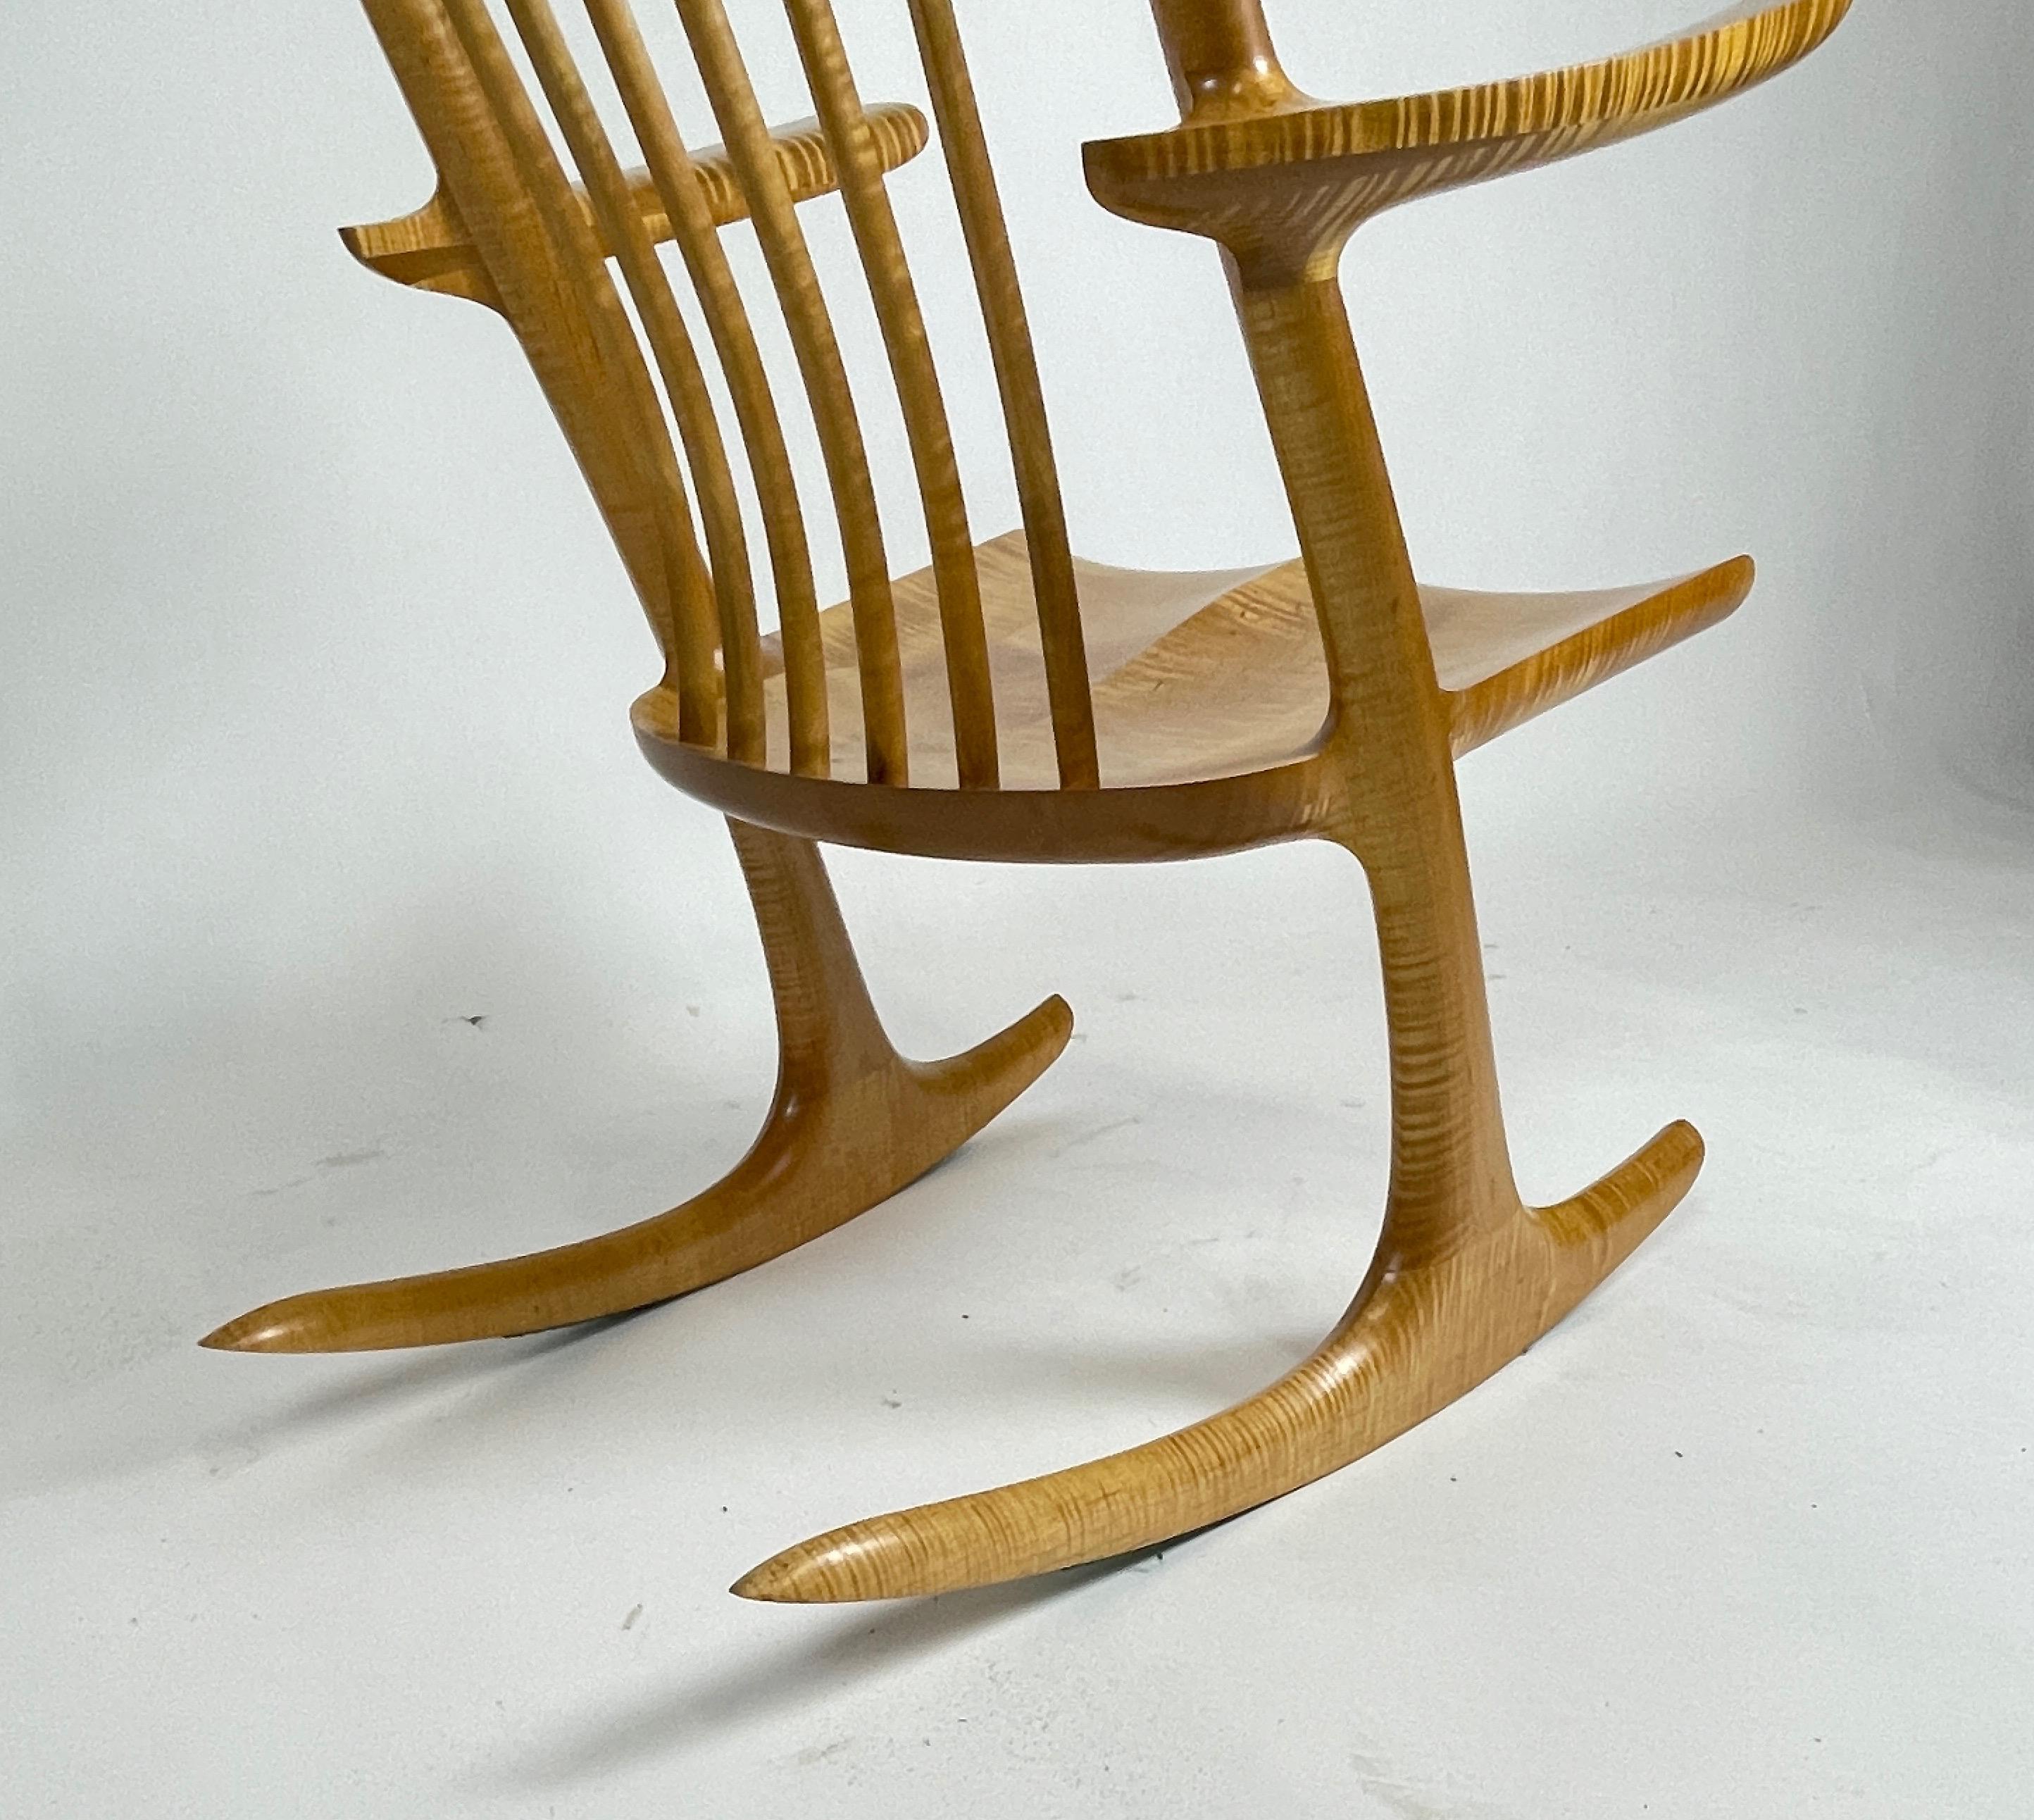 Contemporary Sculptural Studio Handcrafted Rocker Rocking Chair in Curly Maple